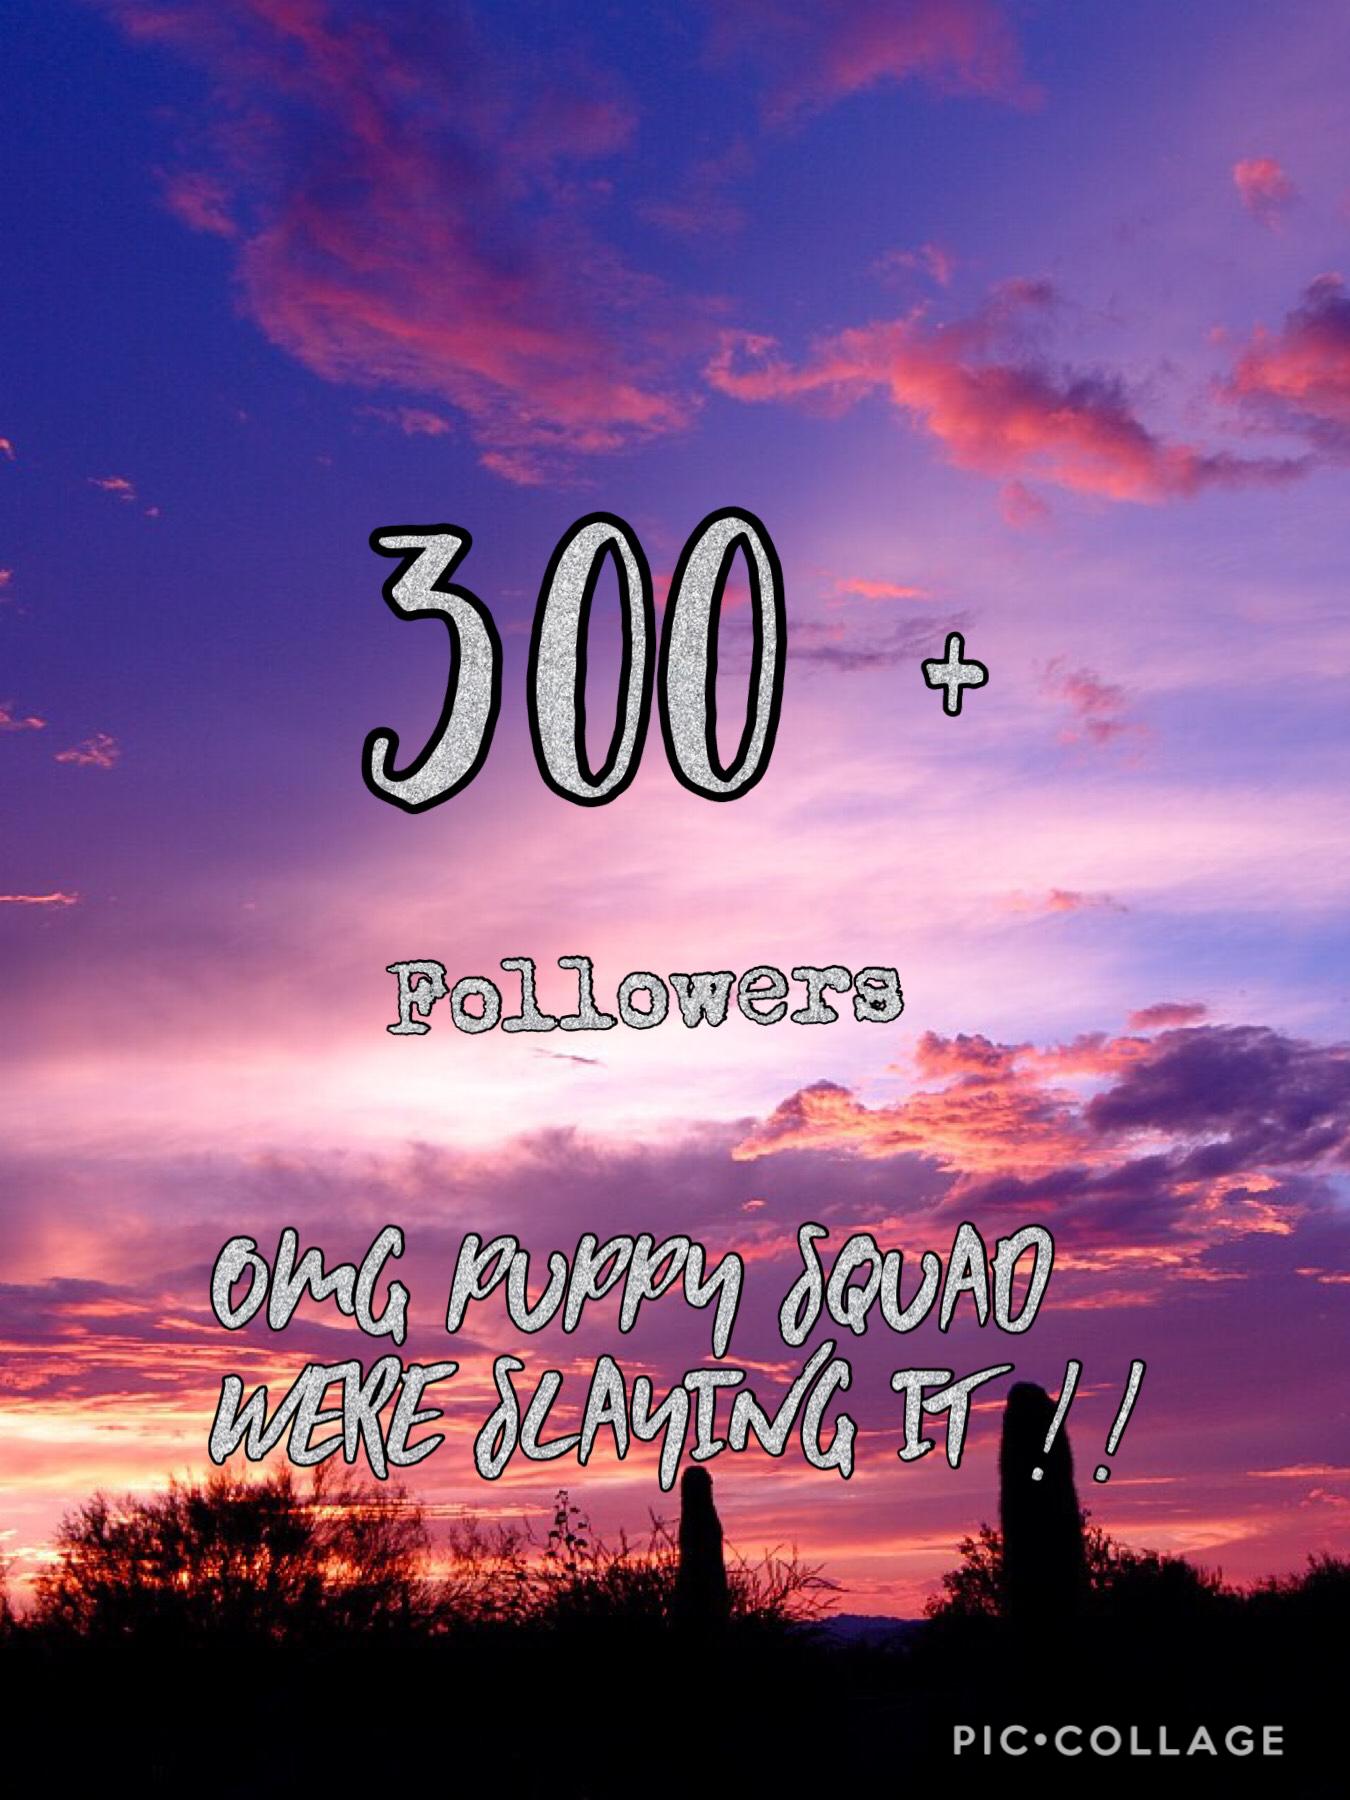 Thanks so much Puppy squad we have over 300 members now!! I just want to say thx to all of you guys I’m so proud !! :):):)